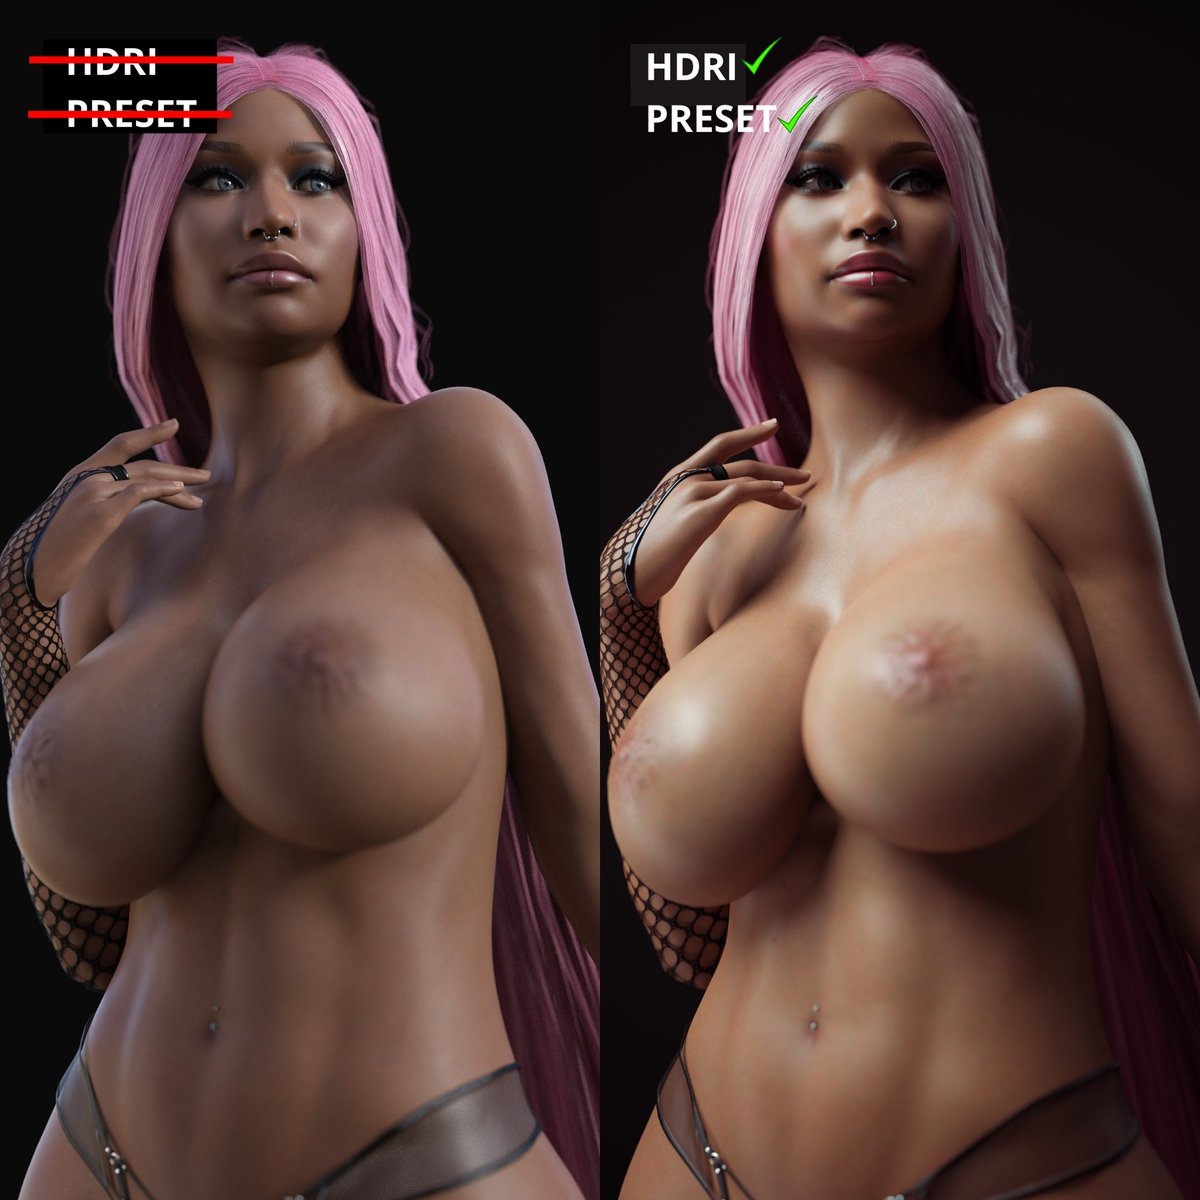 Daz3d tutorial simple tips for beginners  Female Girl Naked Sexy Hot Big Tits Render Perfect Body